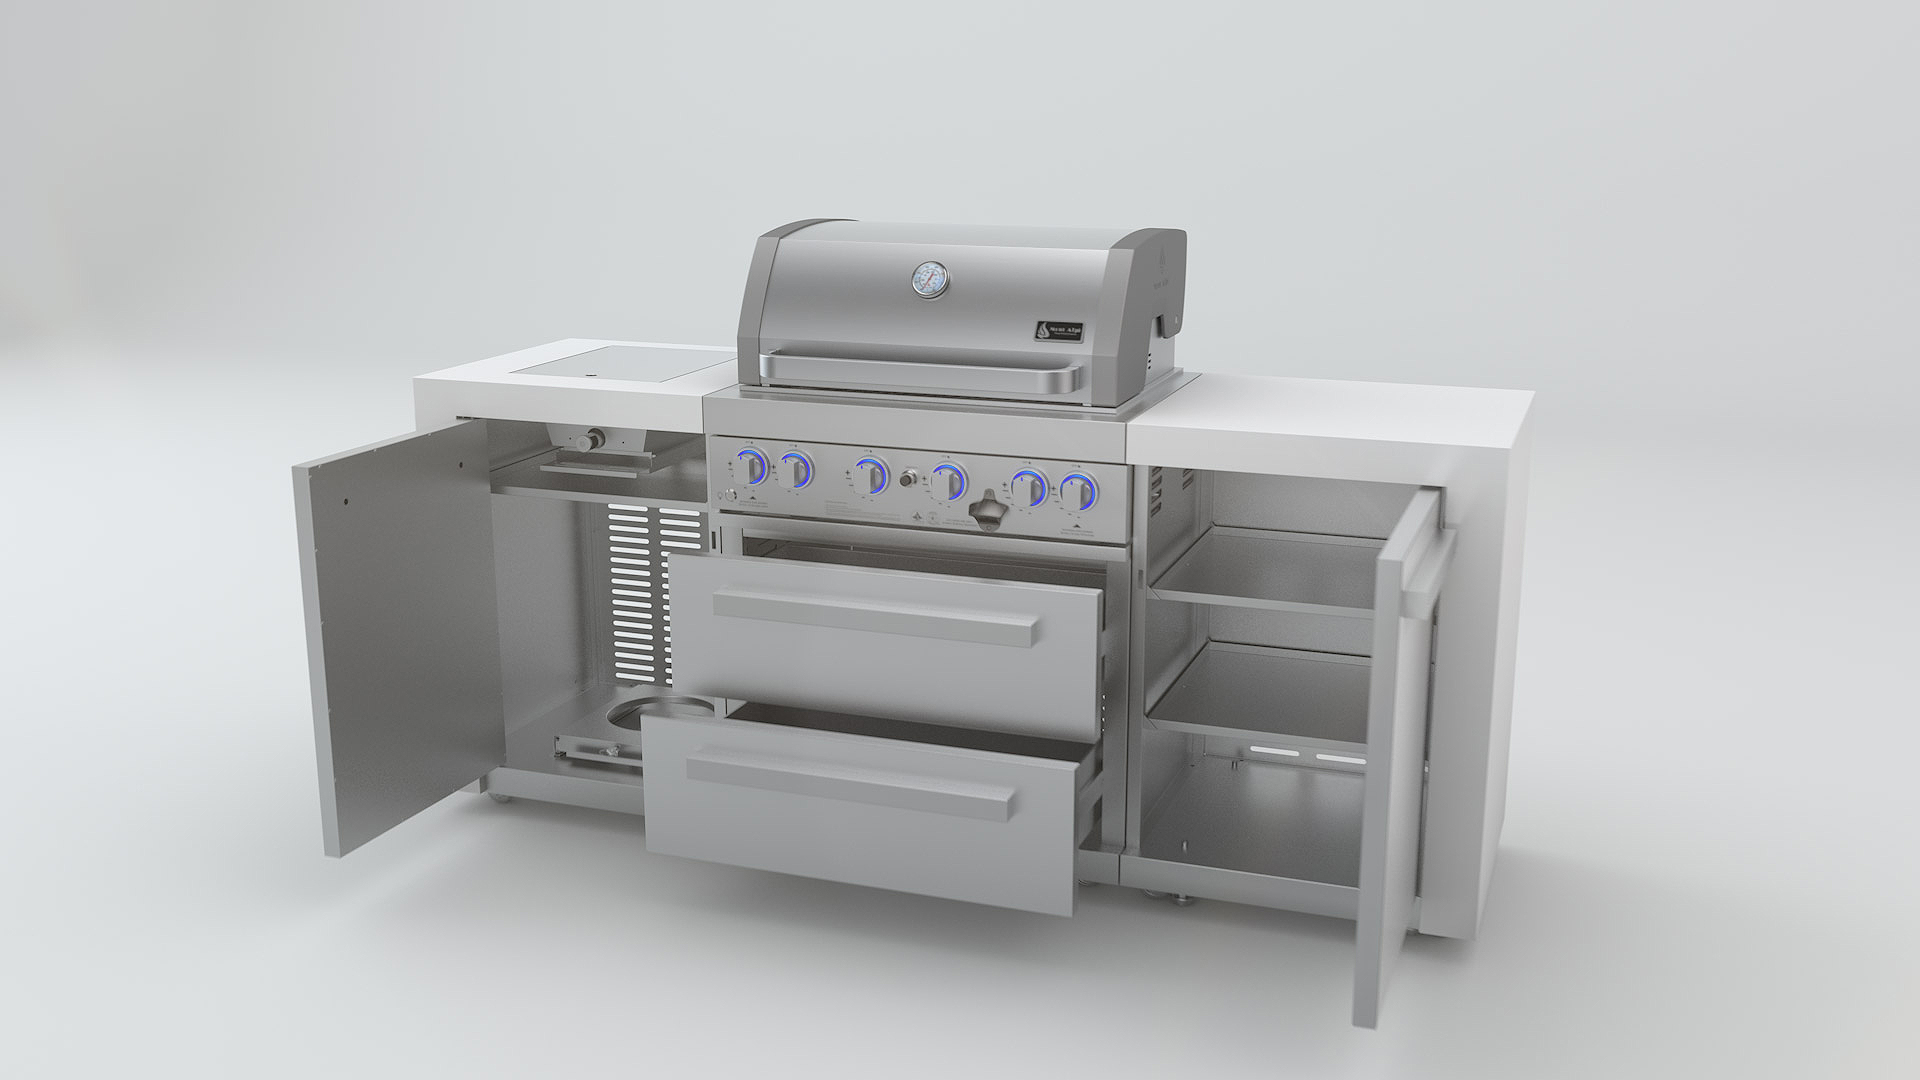 Mont Alpi 400 Deluxe Island Grill - image 2 of 3